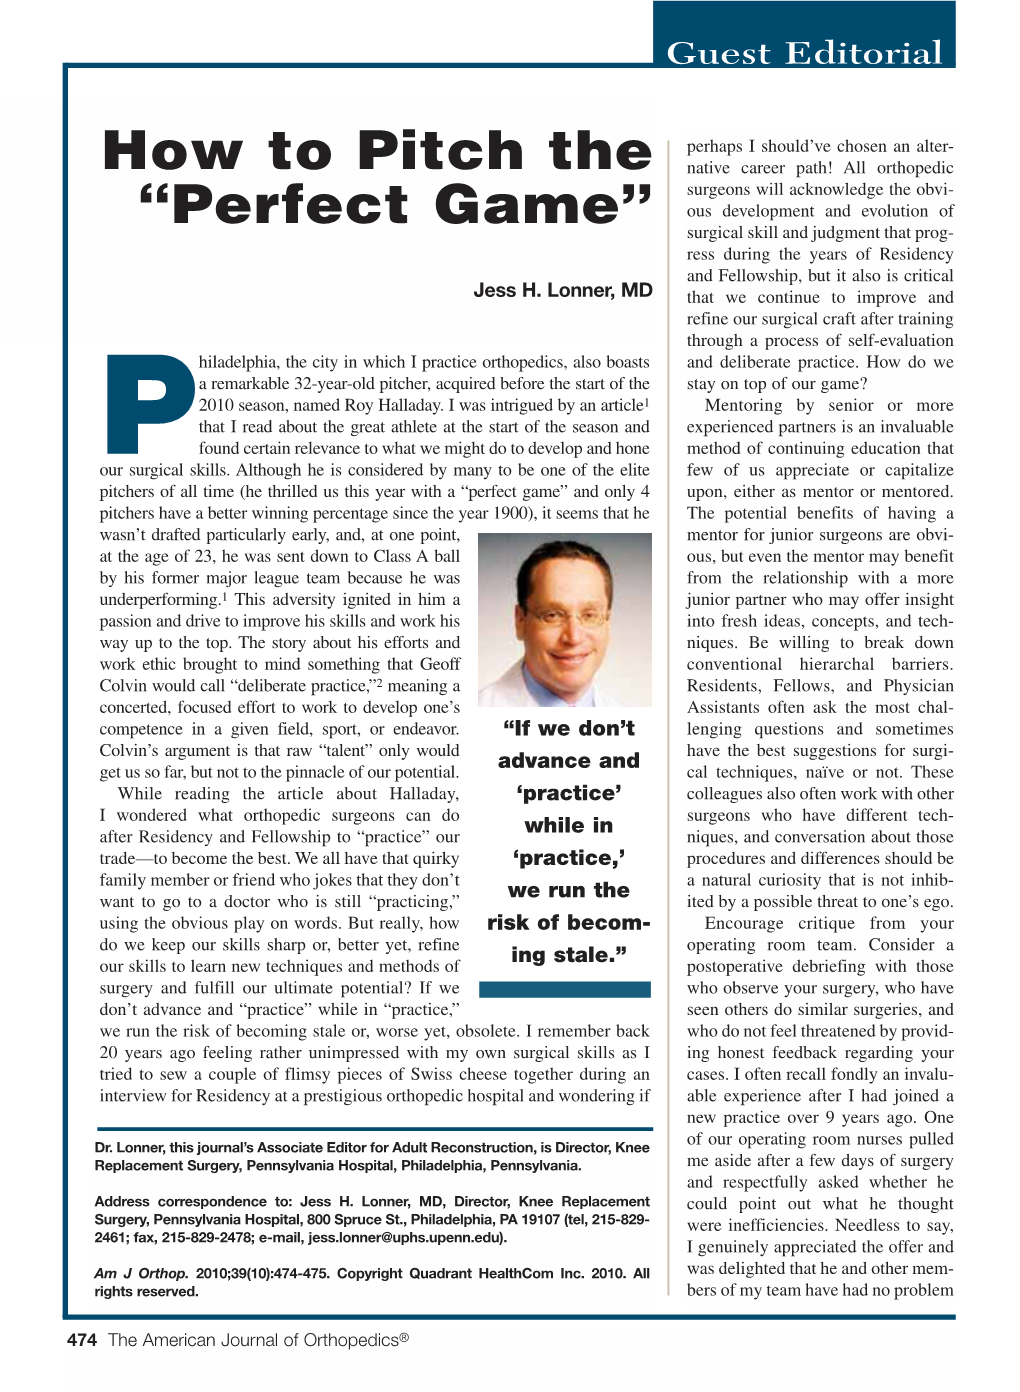 How to Pitch the ''Perfect Game''